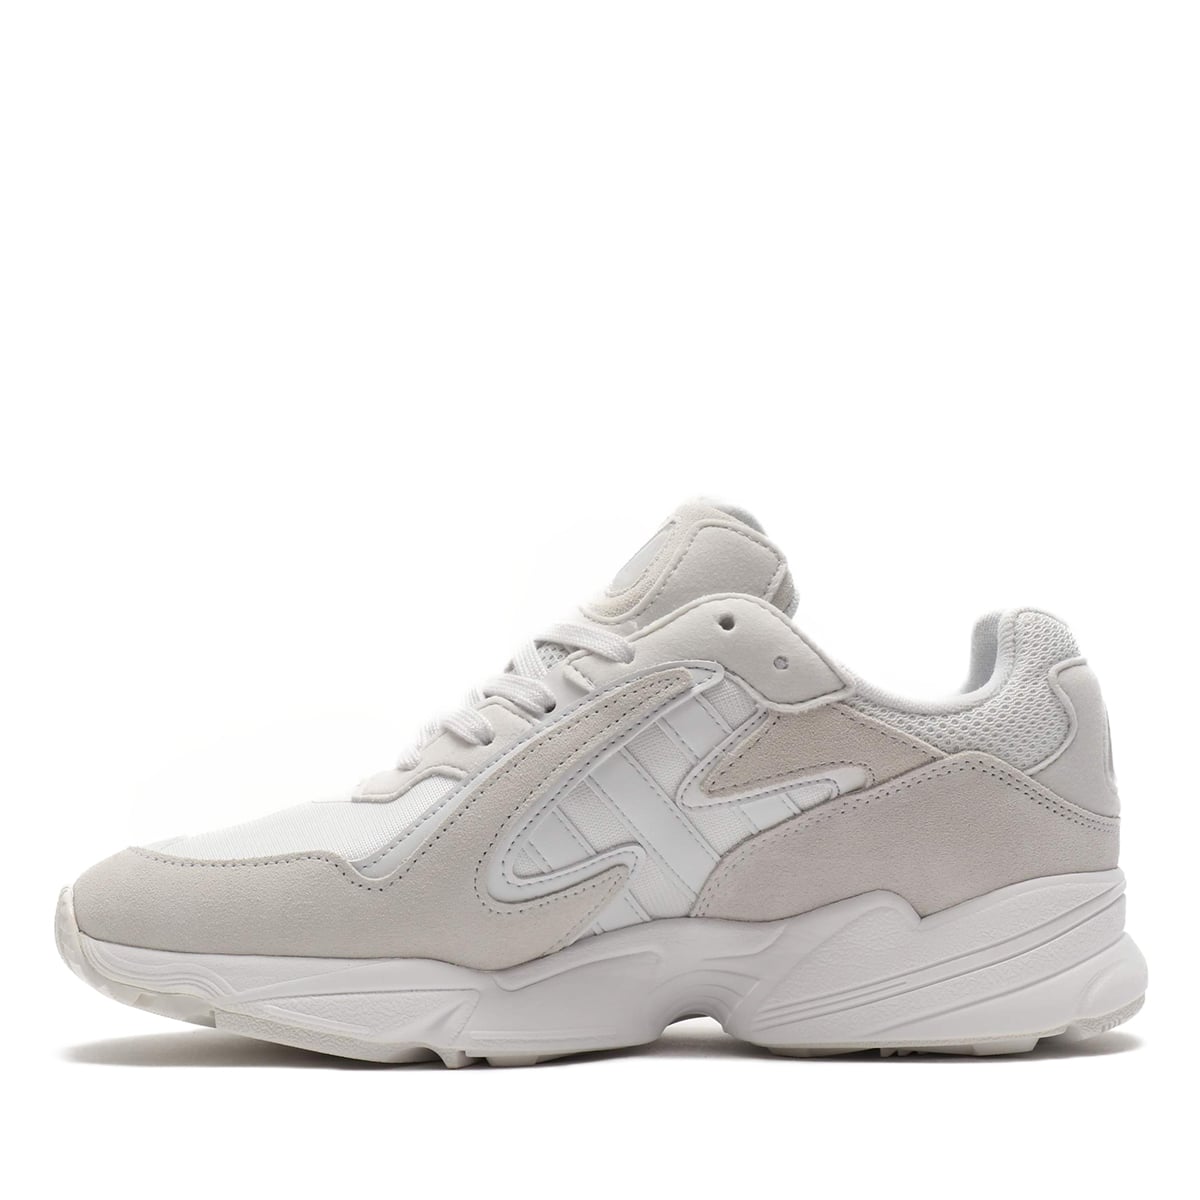 adidas Originals YUNG-96 CHASM CRYSTAL WHITE／CRYSTAL WHITE 2019FW-S